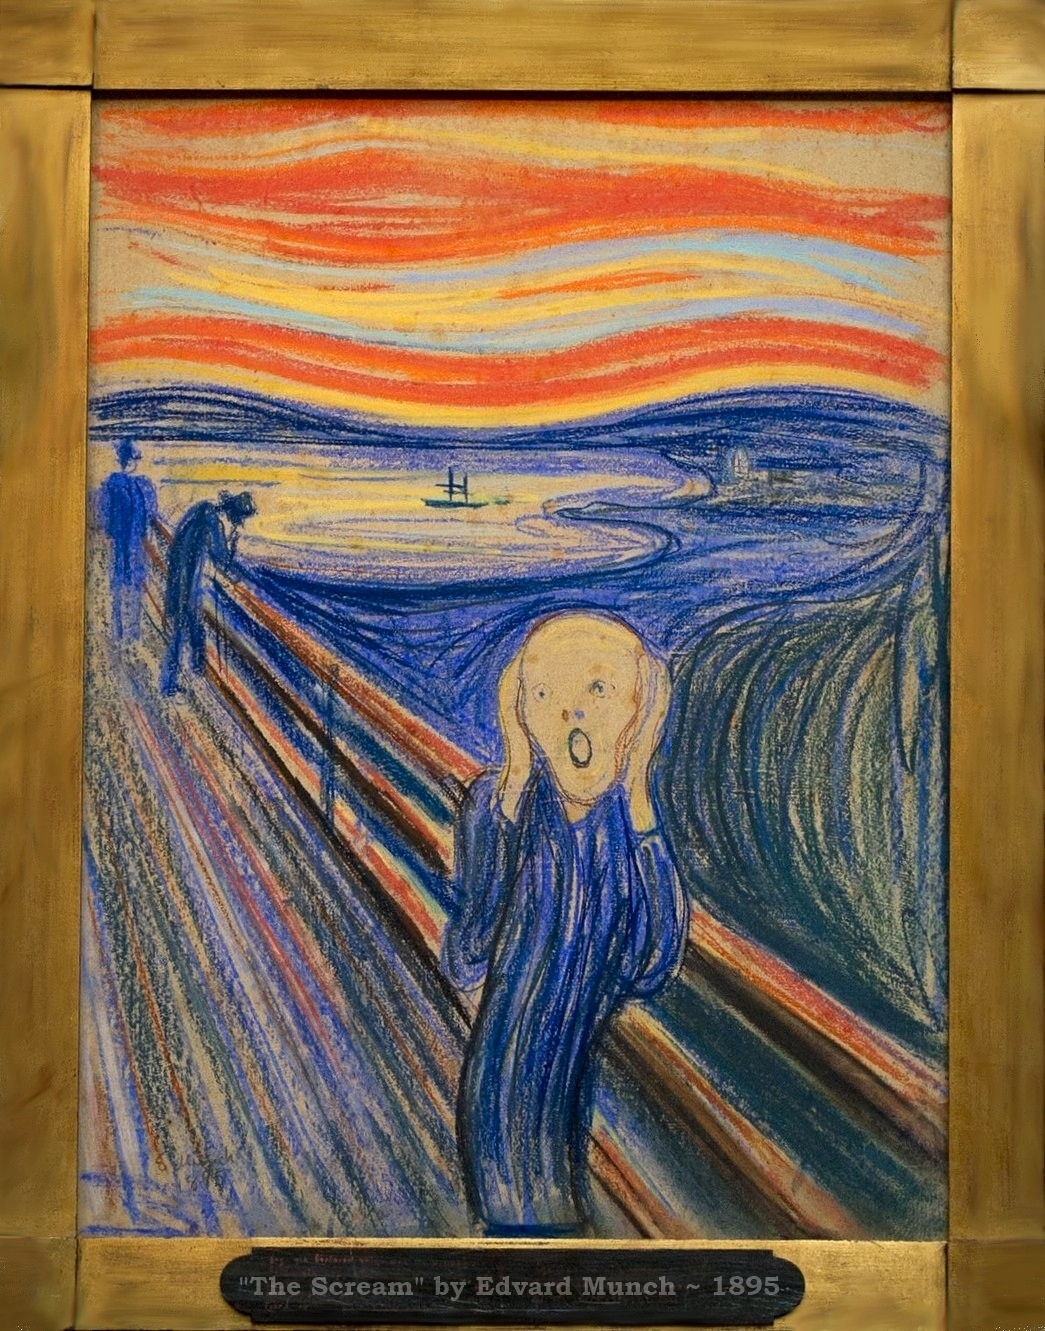 The Scream by Edvard Munch ~ 1895 pastel on board ~ sold for $US119.9 million